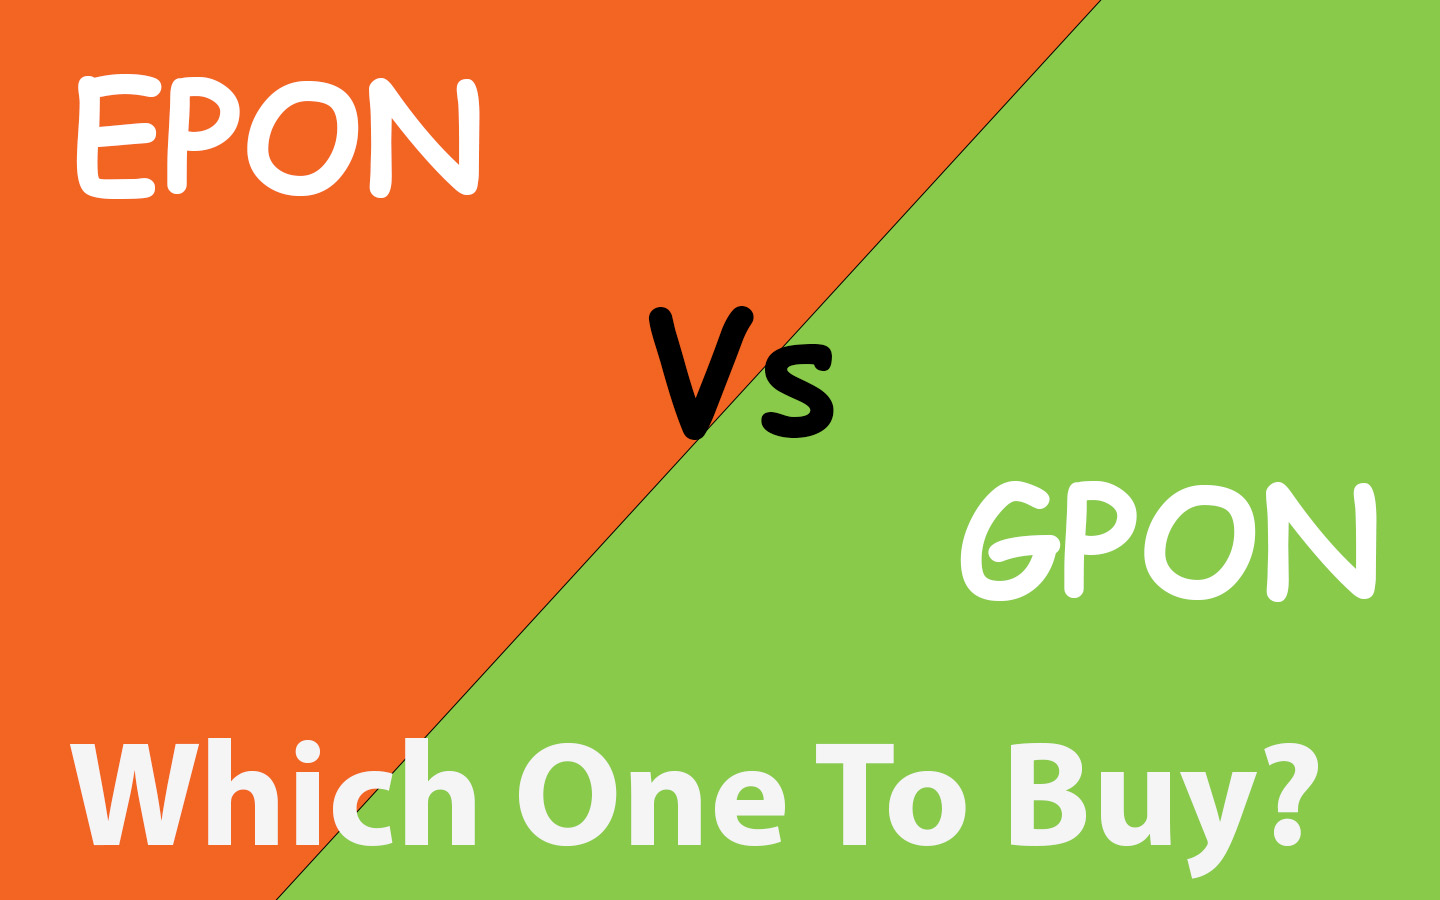 EPON Vs GPON which one to buy